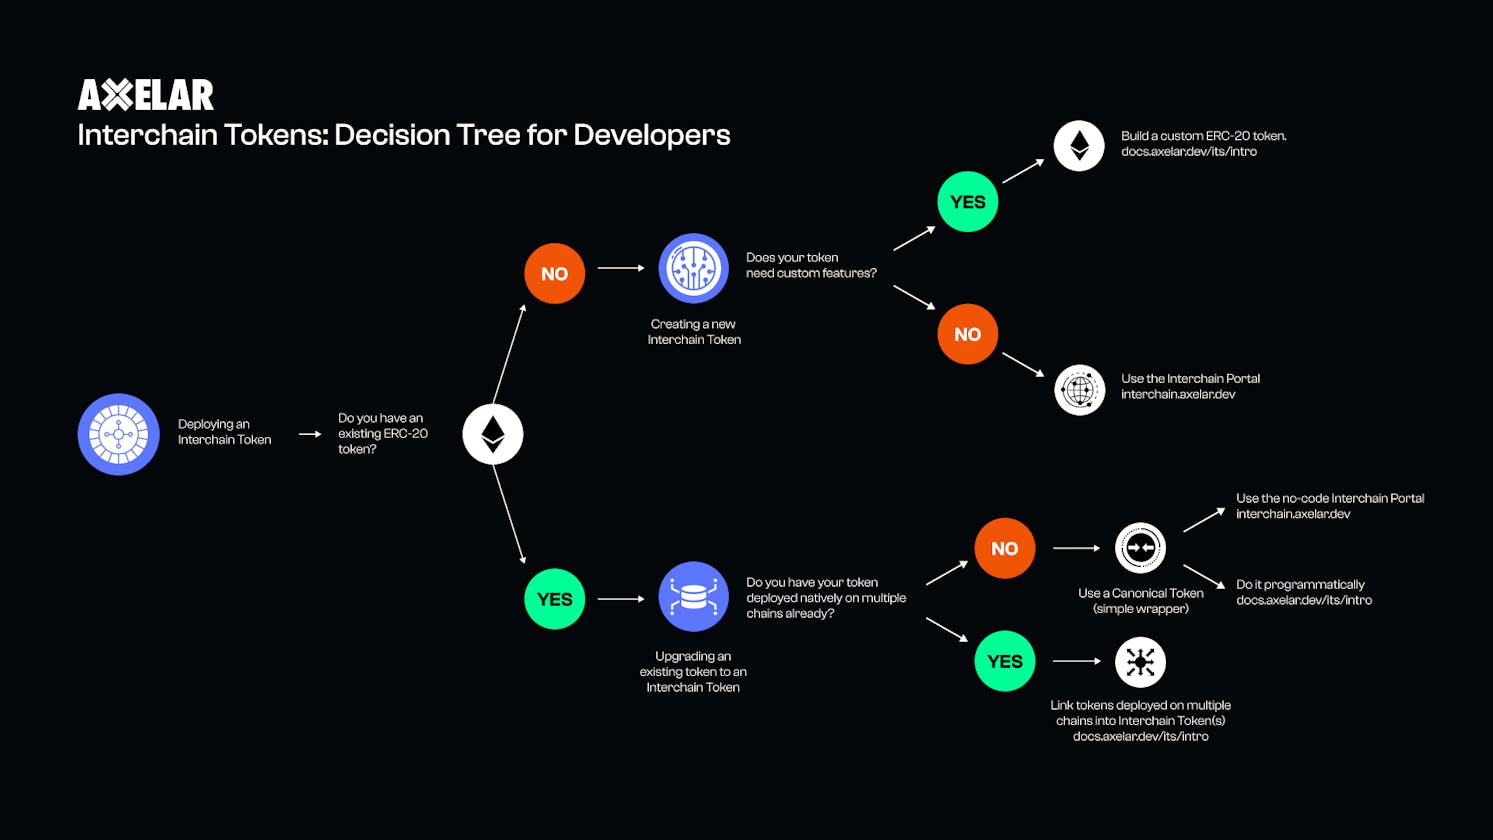 Interchain Token Service: Navigating Your Choices with a Decision Tree